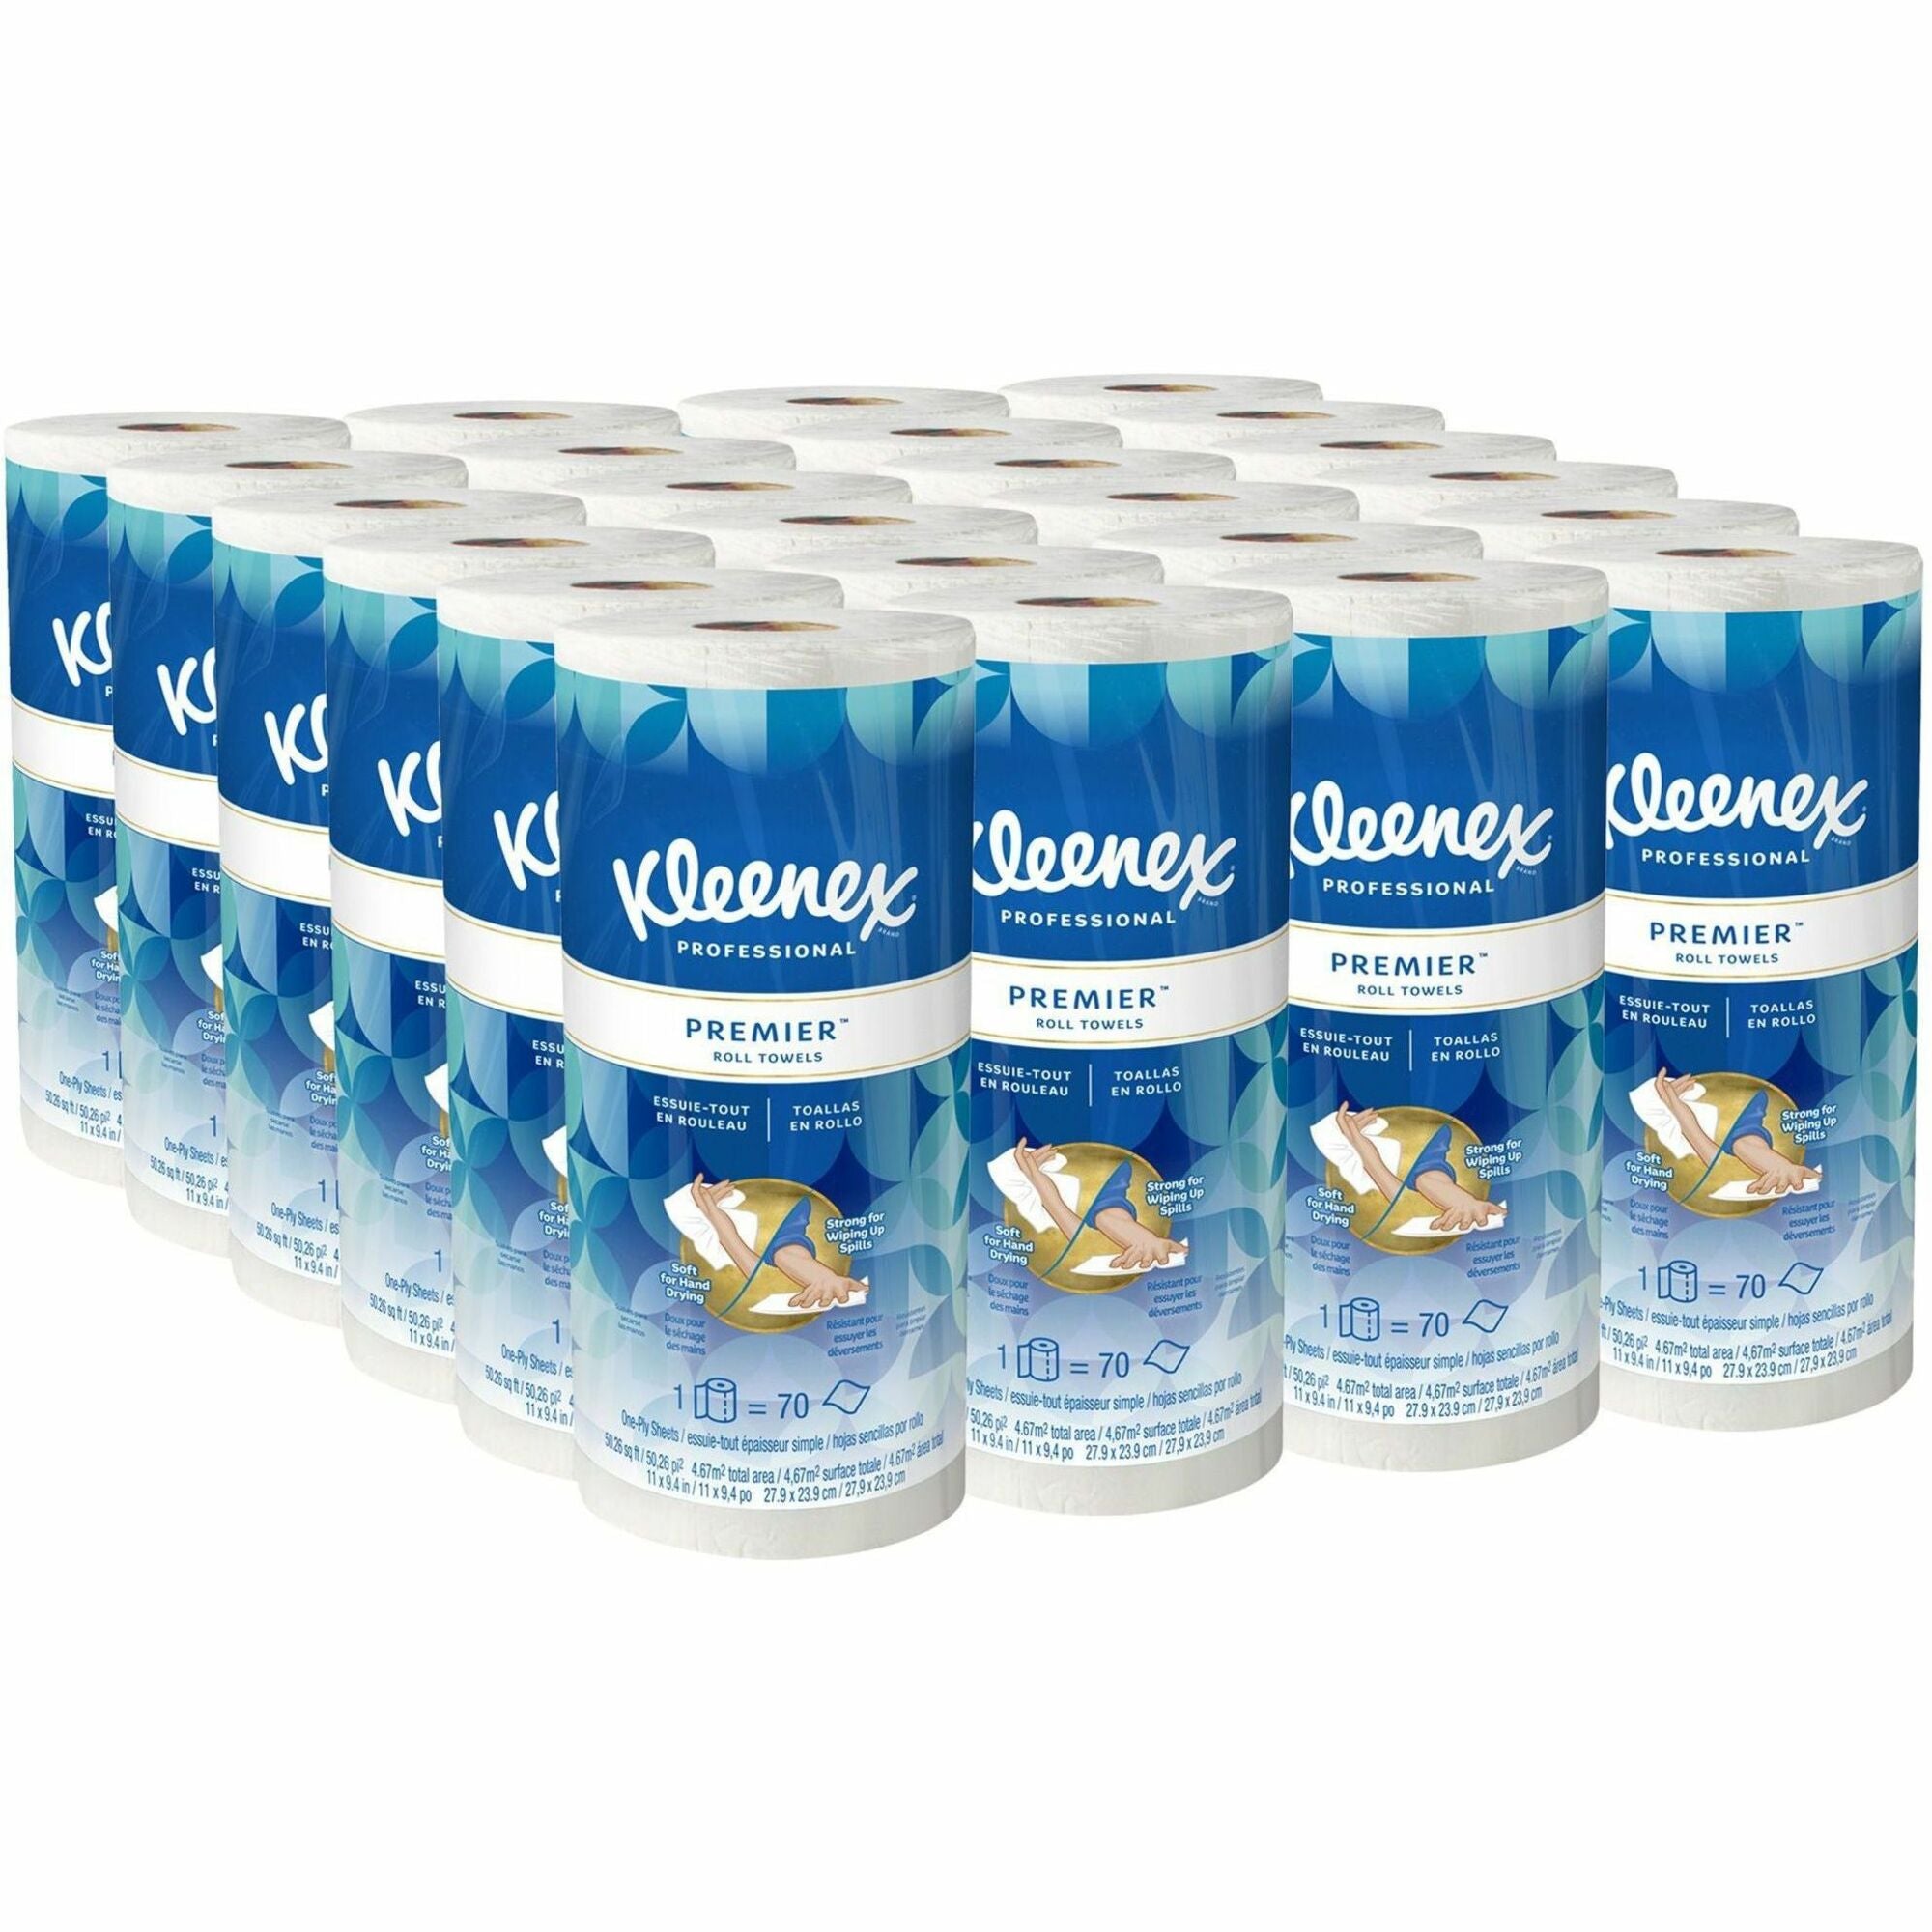 Kleenex Premier Kitchen Paper Towels - 1 Ply - 10.40" x 11" - 70 Sheets/Roll - White - Strong, Tear Resistant, Absorbent, Durable, Perforated - For Kitchen, Home, Business - 24 / Carton - 